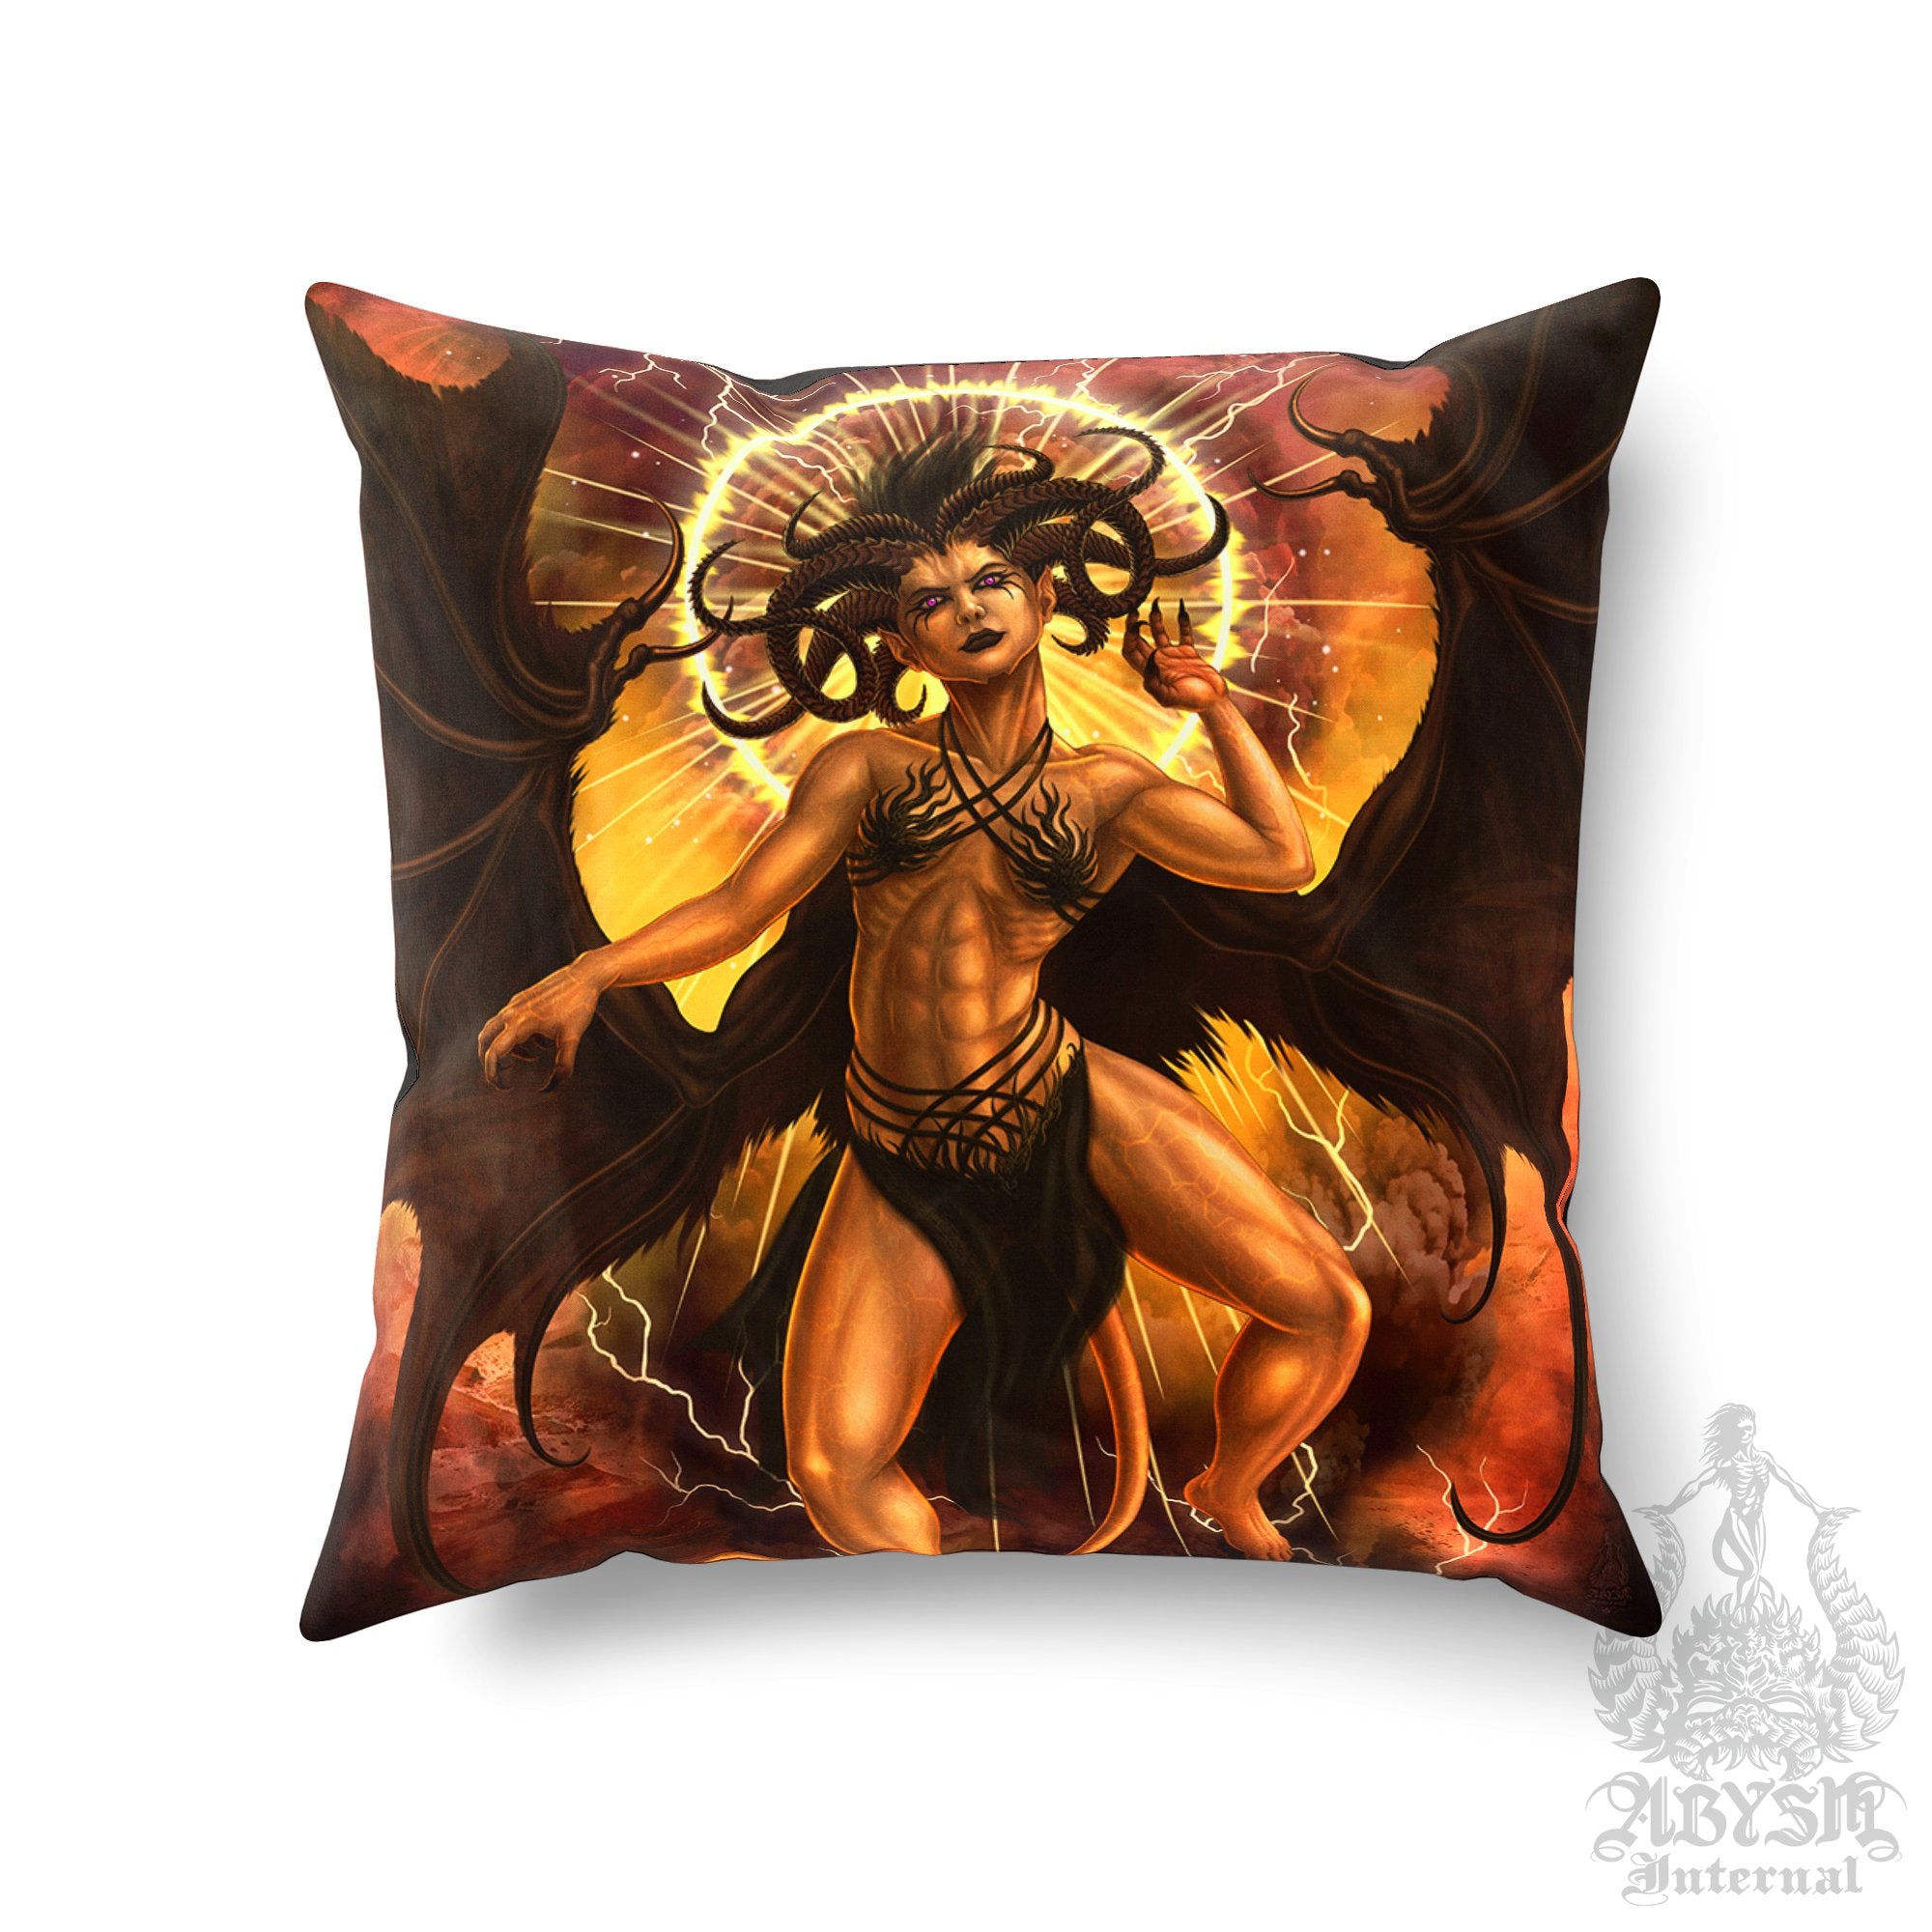 Lilith Throw Pillow, Decorative Accent Pillow, Square Cushion Cover, Demon, Game Room Decor, Dark Fantasy, Erotic Art, Alternative Home - Clothed, Semi, Nude, 3 versions - Abysm Internal